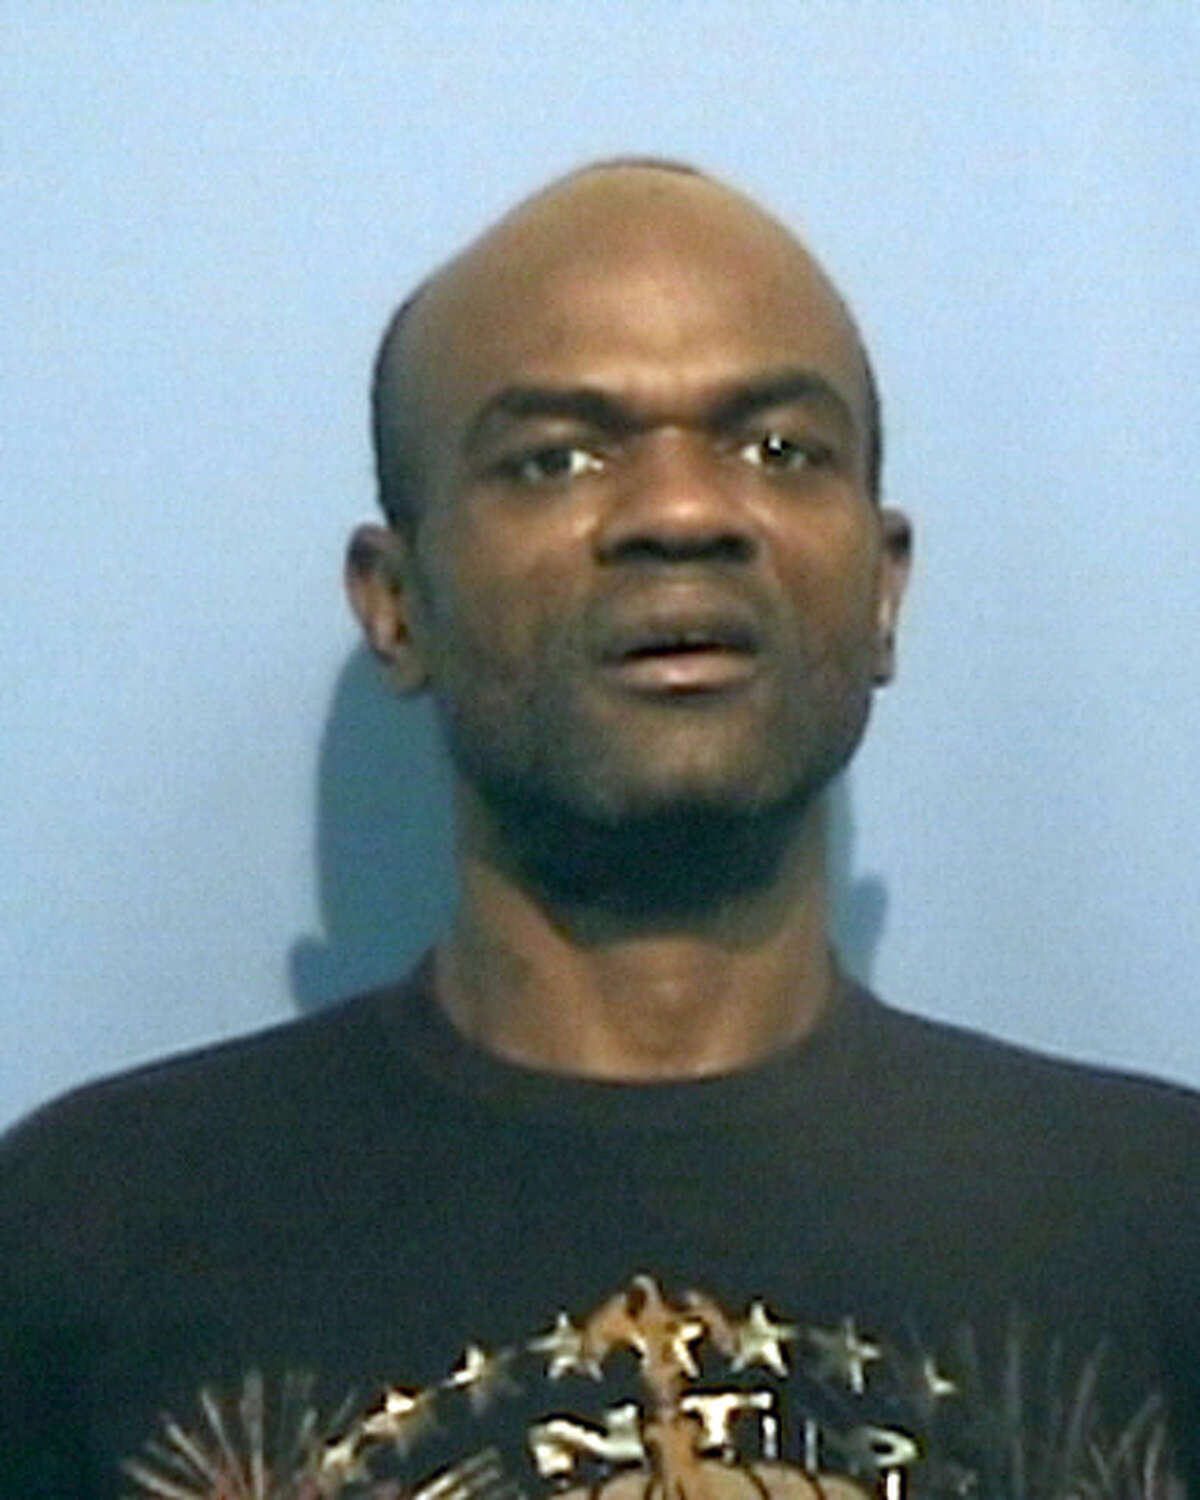 Brisket Bandit, James Avery, who has been charged with stealing thousands of dollars worth of barbecue meat from nearly two dozen grocery stores around Central Texas.